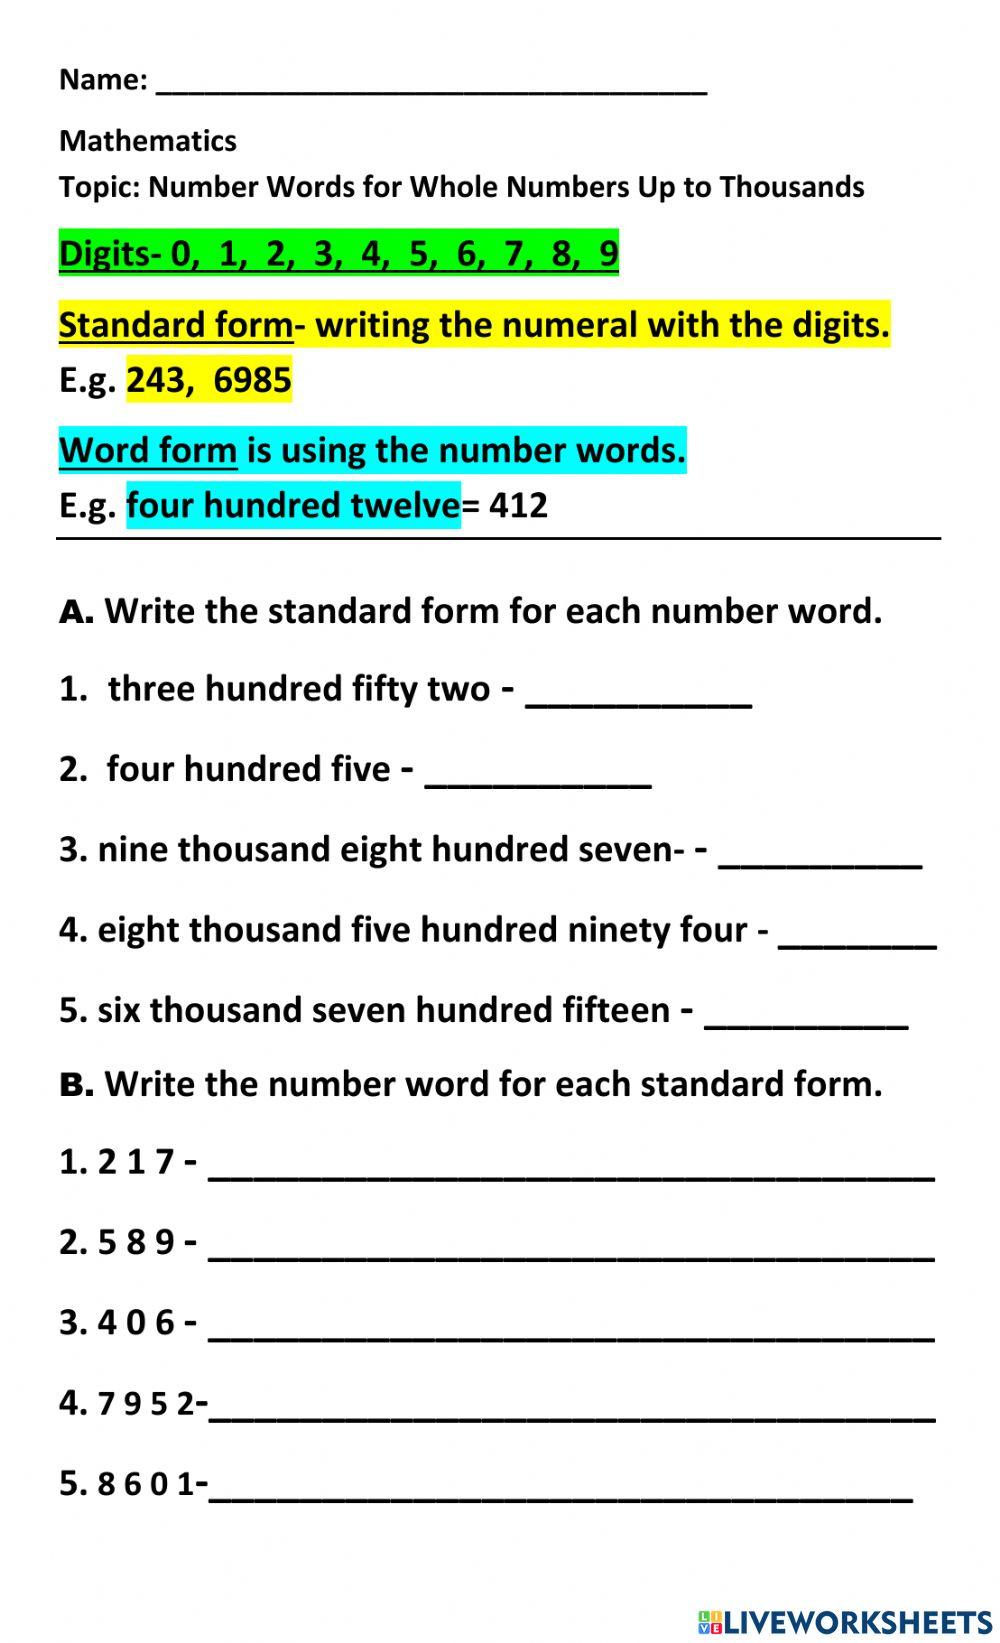 Standard Form and Word Form of Numbers